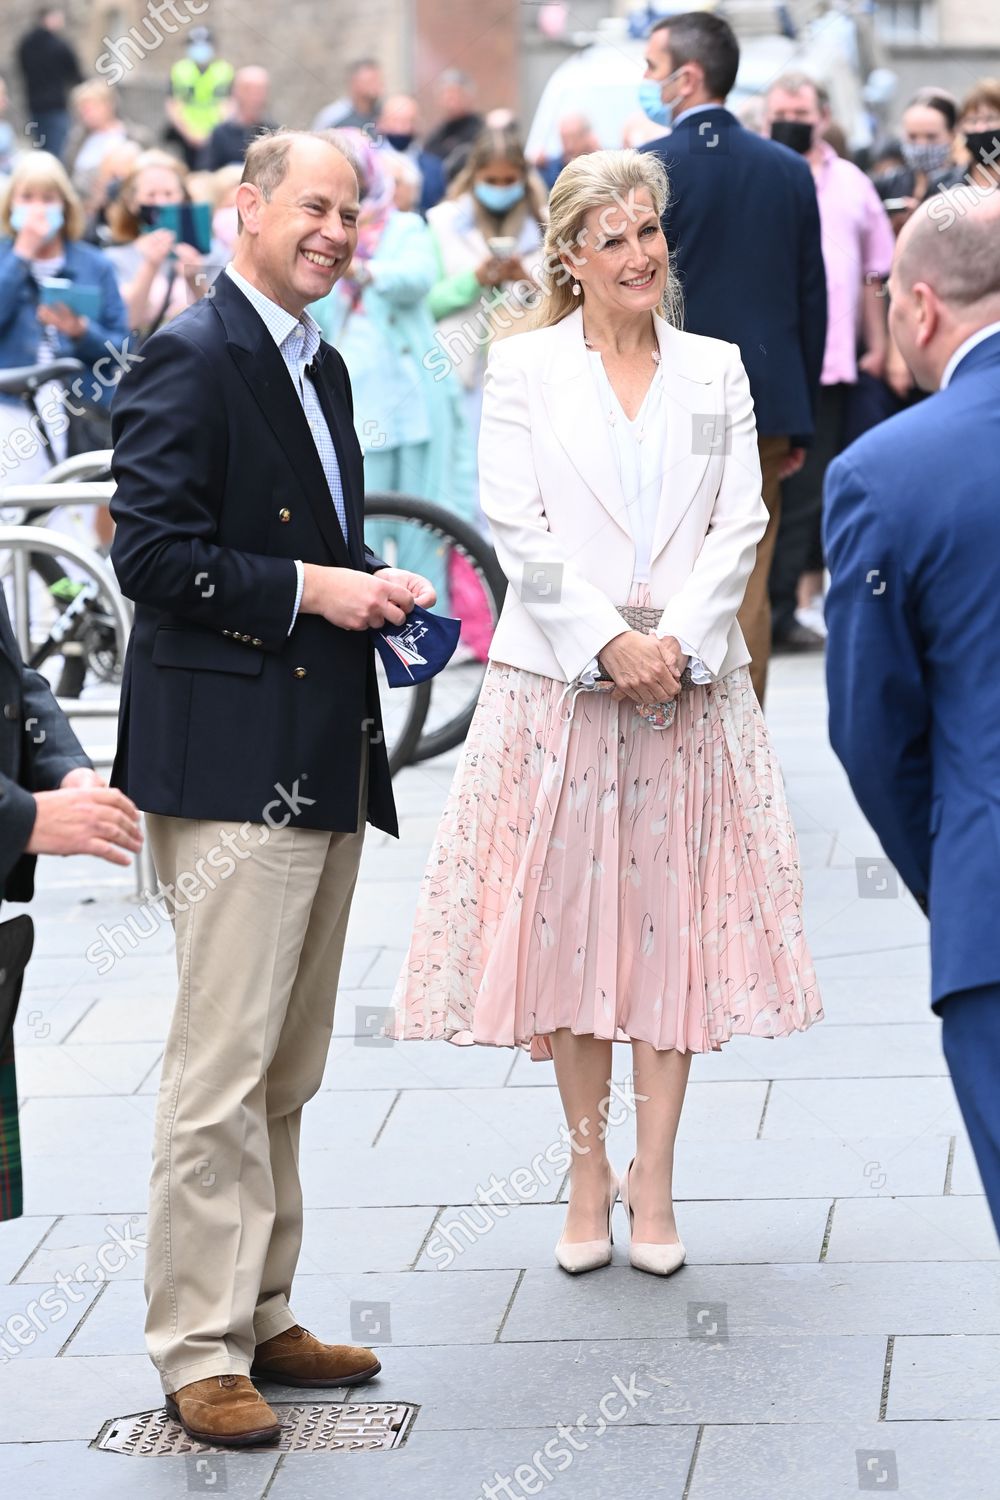 prince-edward-and-sophie-countess-of-wessex-visit-to-edinburgh-scotland-uk-shutterstock-editorial-12173651n.jpg